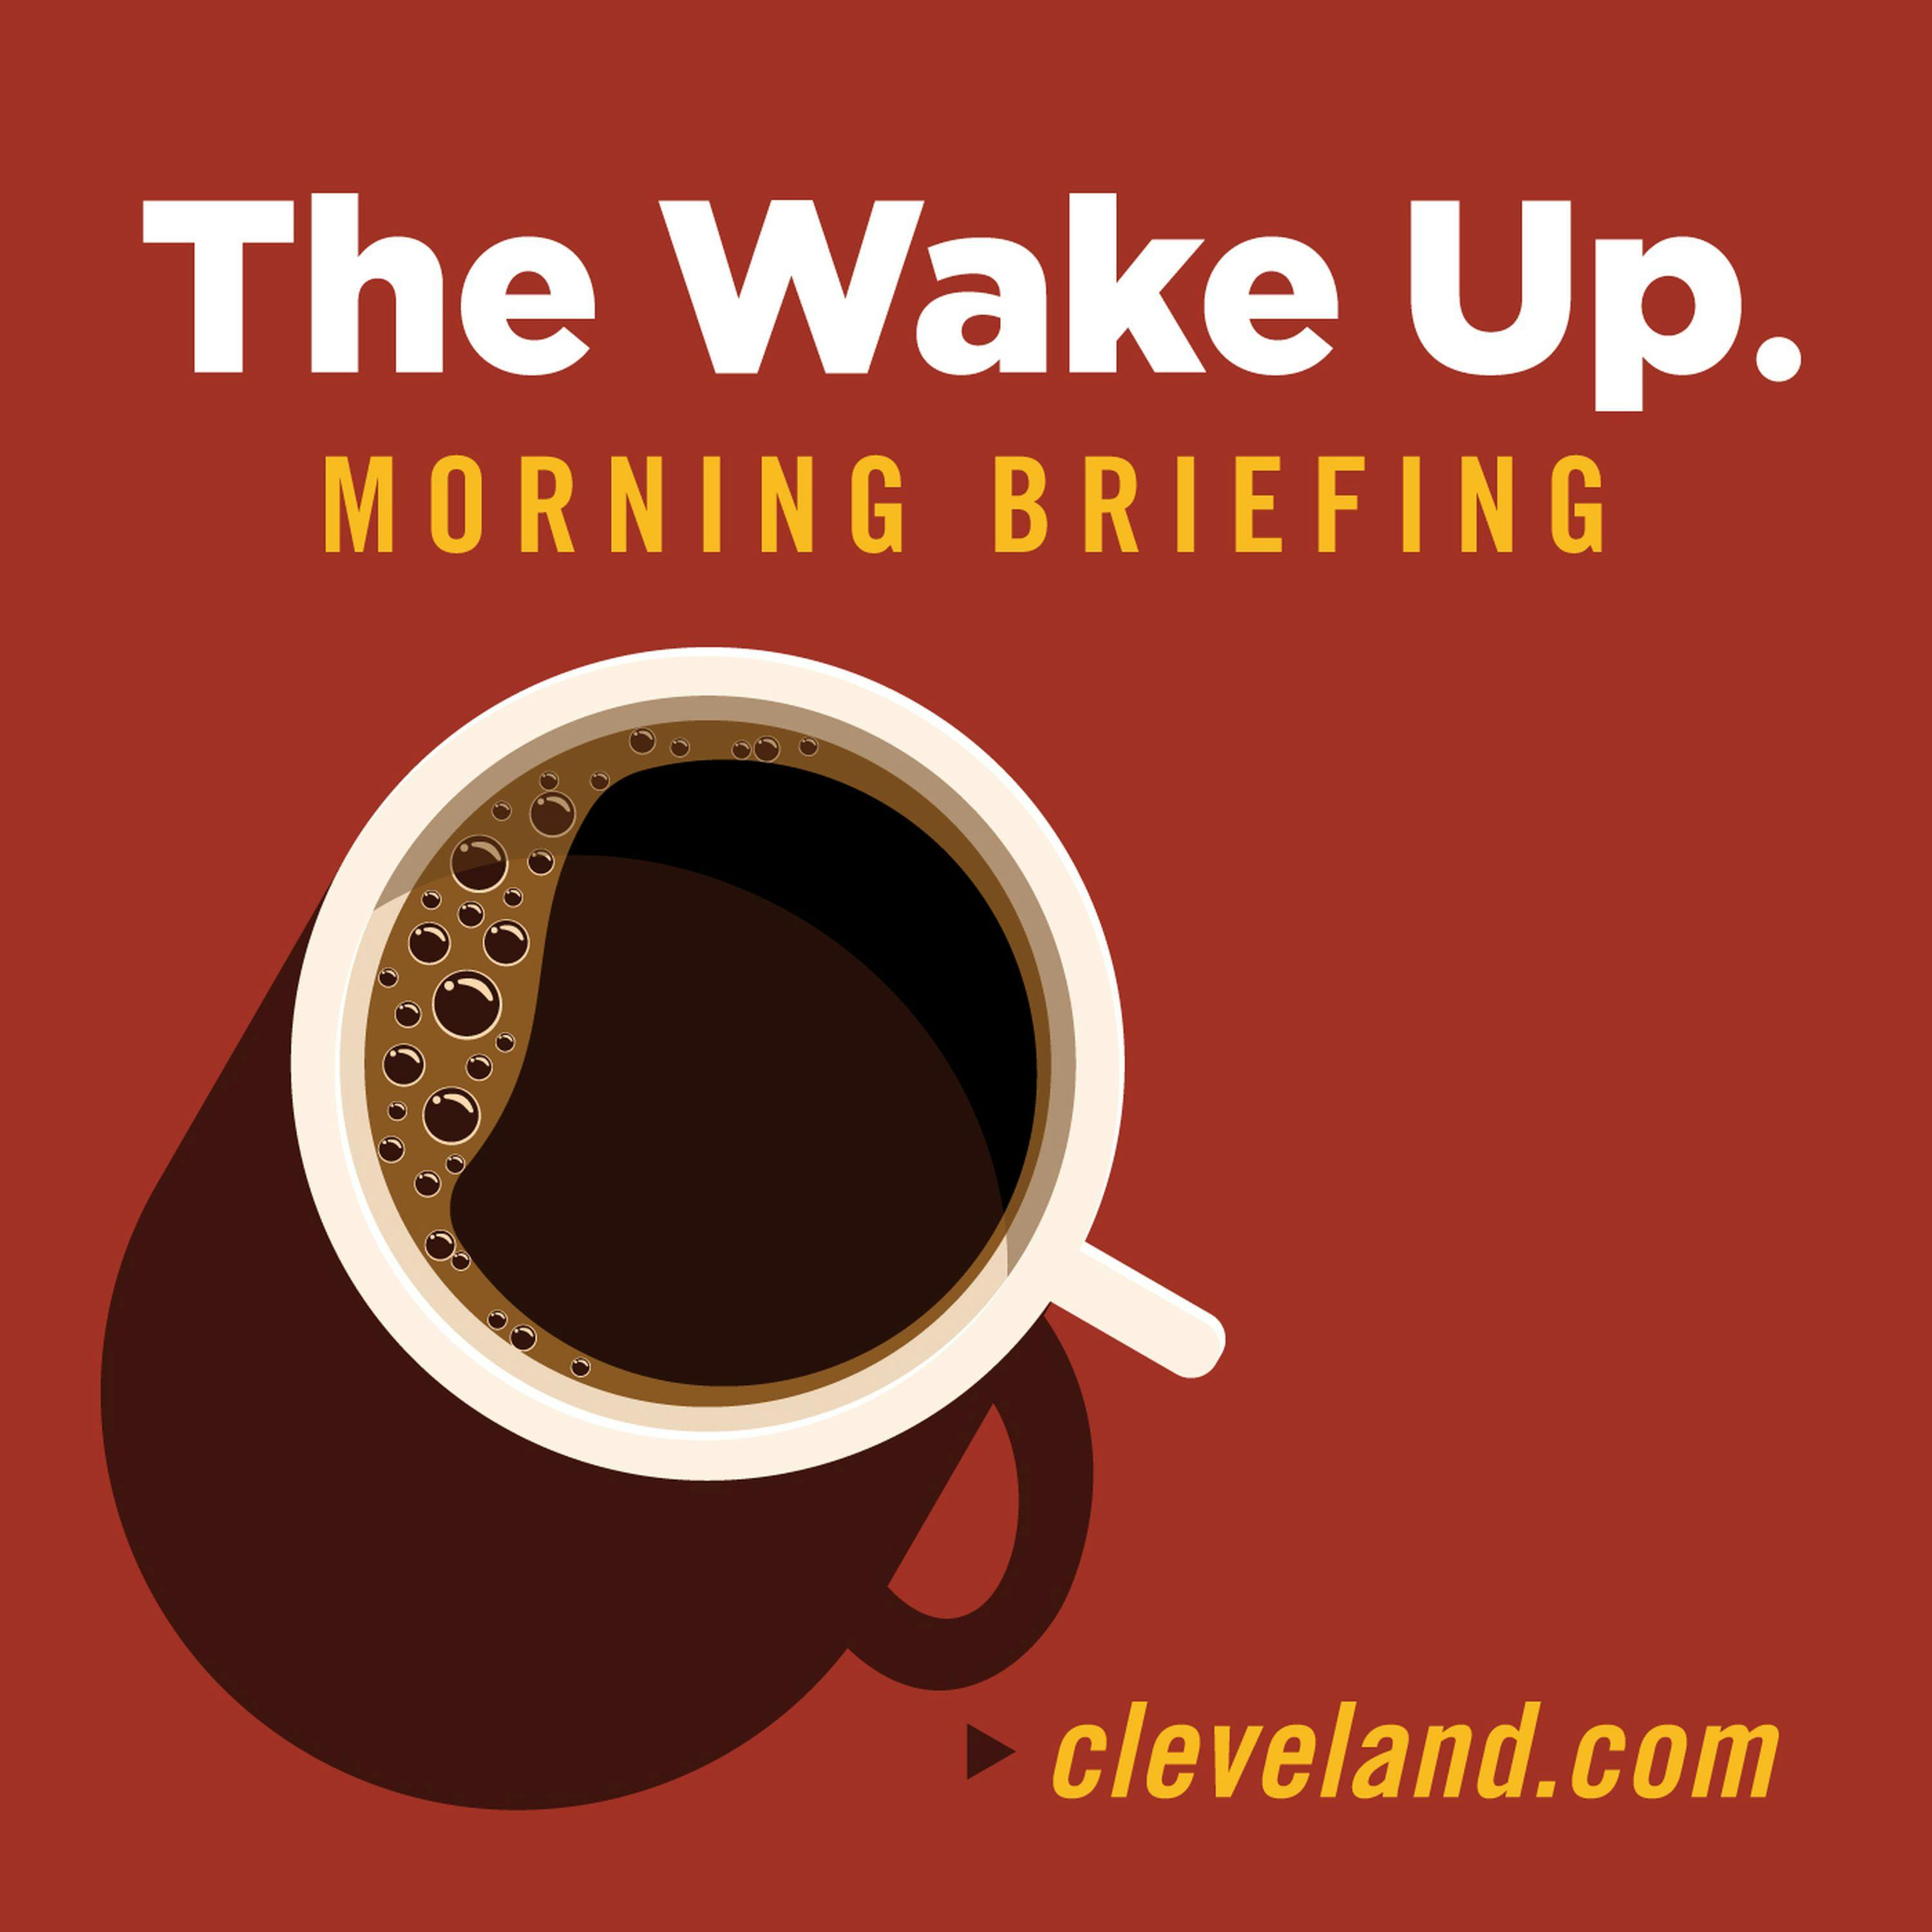 The Wake Up - July 10, 2020 - Yes, Broken Heart Syndrome is real, and the Cleveland Clinic says Covid 19 is causing it